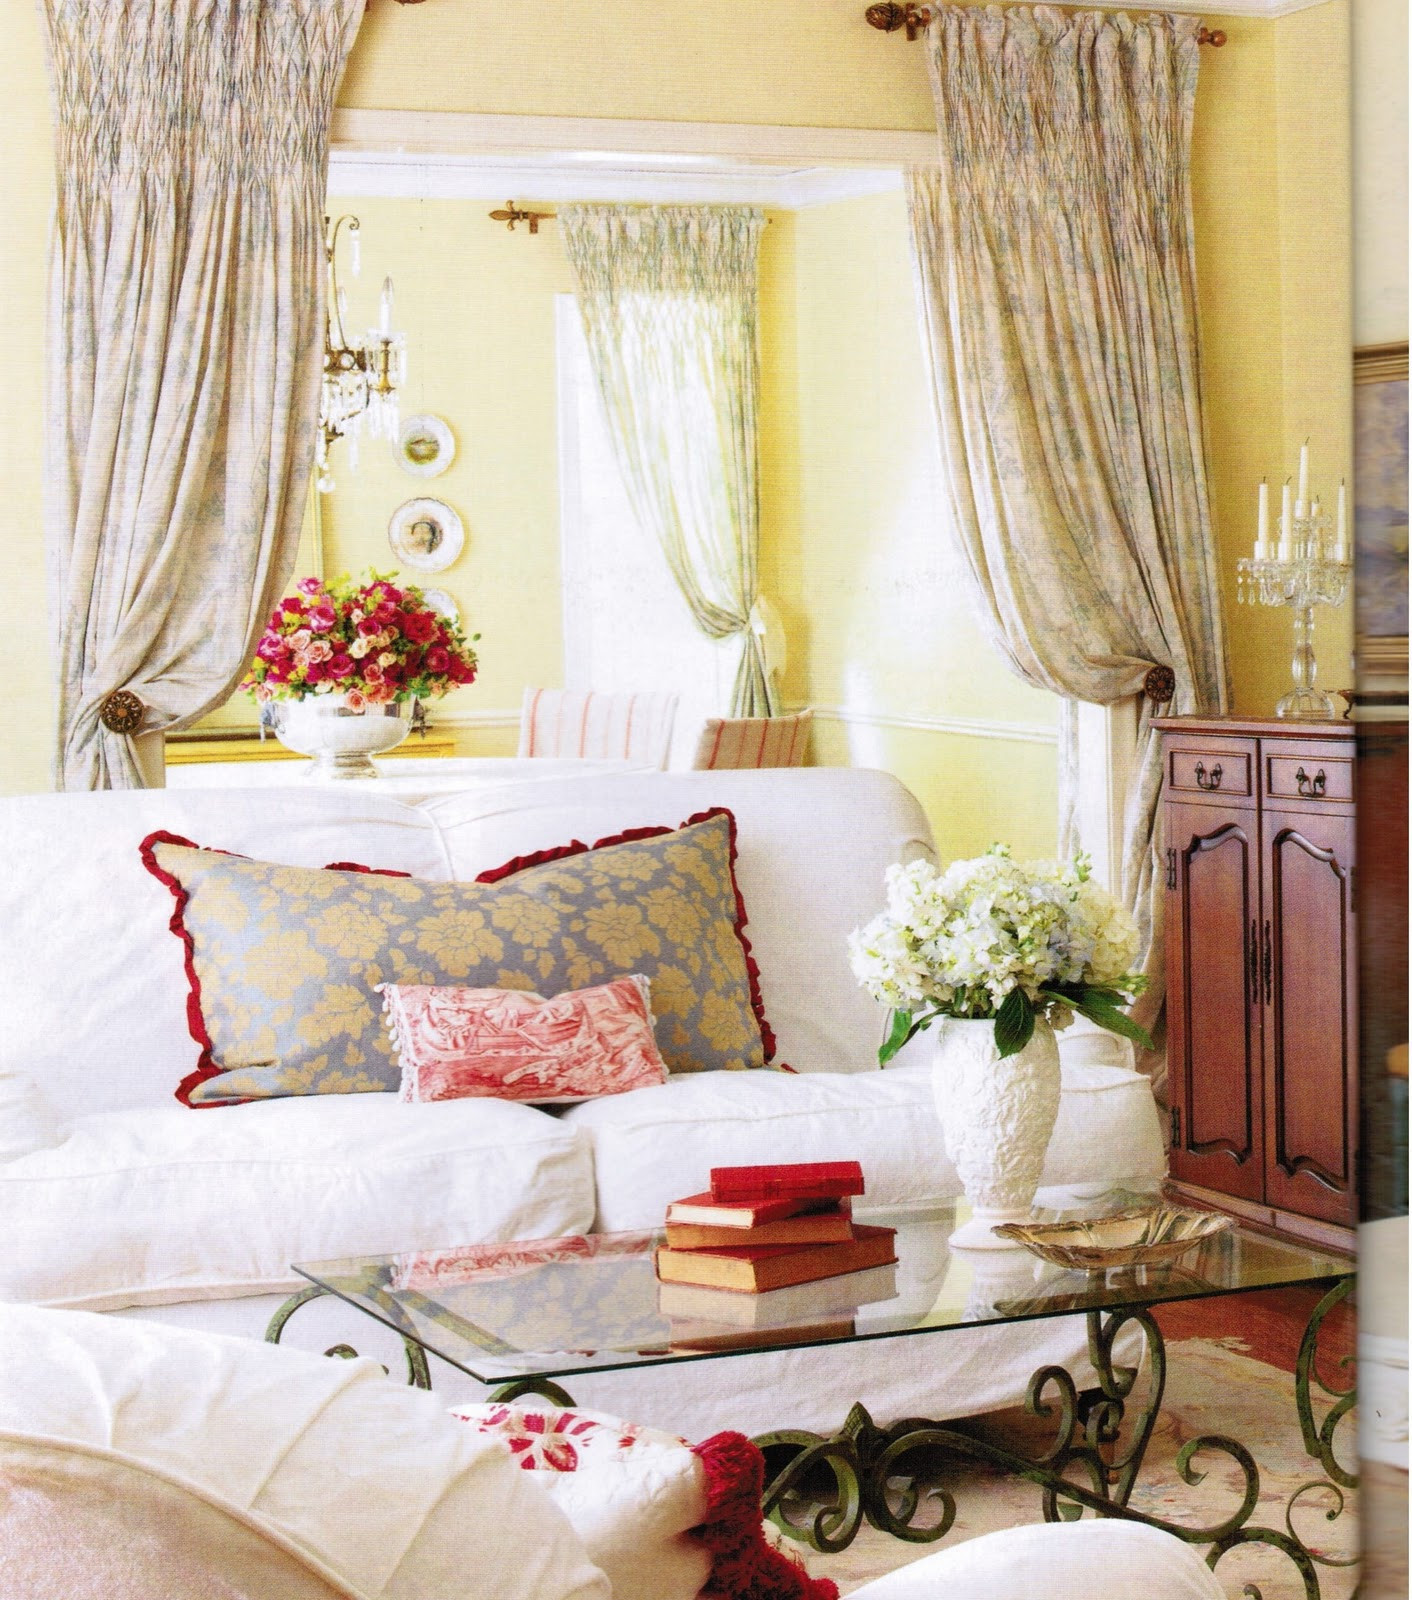 Living Room Country Curtains
 Maison Decor French Country Enchanting Yellow & White